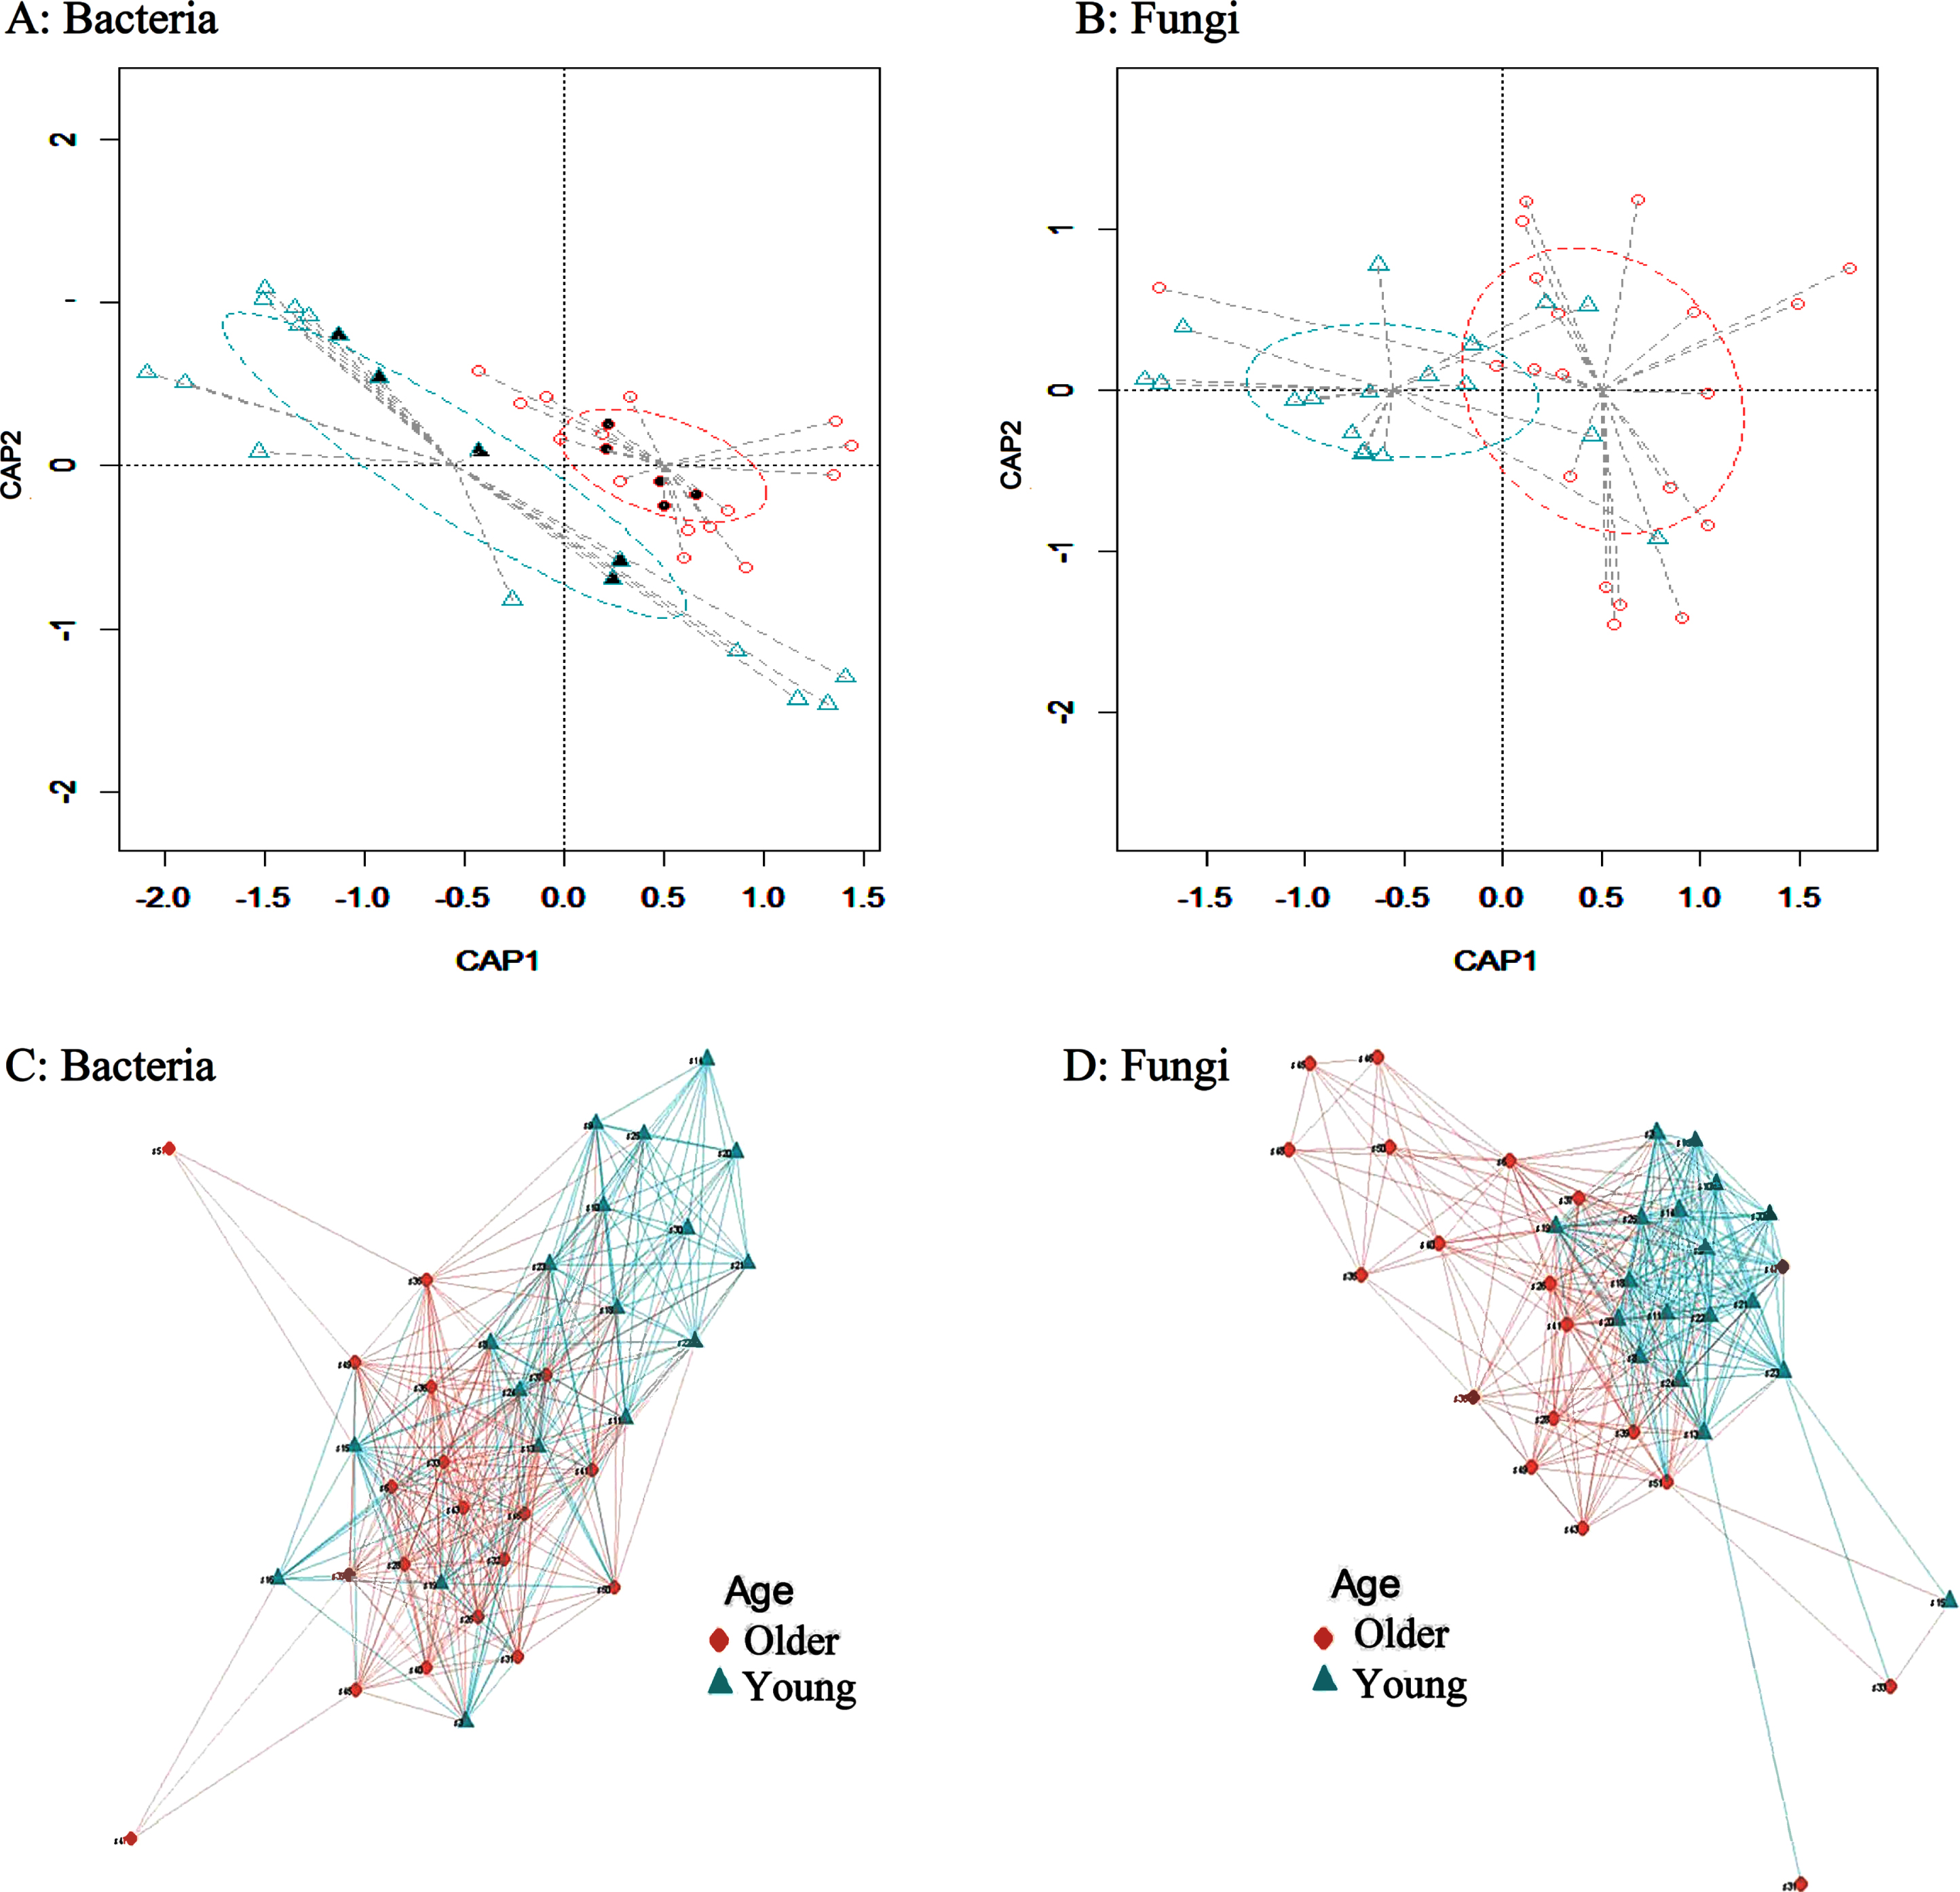 Exploration of beta diversity of bacterial and fungal taxa between young and older individuals. A) A plot of the Constrained Principal Coordinate Analysis (PCoA) based on Bray-Curtis distance matrix between young and older age groups for bacteria. B) A plot of the Constrained Principal Coordinate Analysis (PCoA) based on Bray-Curtis distance matrix between young and older age groups for fungi. A significant segregation between the two groups for both bacteria and fungi was found (p-value < 0.001; permutation test with pseudo-F ratios). C) A network plot based on Bray-Curtis distances for bacteria. D) A network plot based on Bray-Curtis distances for fungi. The nodes are the subjects and two vertices are connected with an edge if the maximum distance is less than or equal a default value of 0.7. The length of the edge is the maximum distance between the two vertices. The package igraph from R software was used to create the network. Older and young corresponding clusters are represented by ♦ and ▲, respectively. The solid shapes in the network plots indicate the 10 samples that were analyzed by shotgun metagenomics. CAP1 and CAP2 represent the canonical principal coordinates 1 and 2.